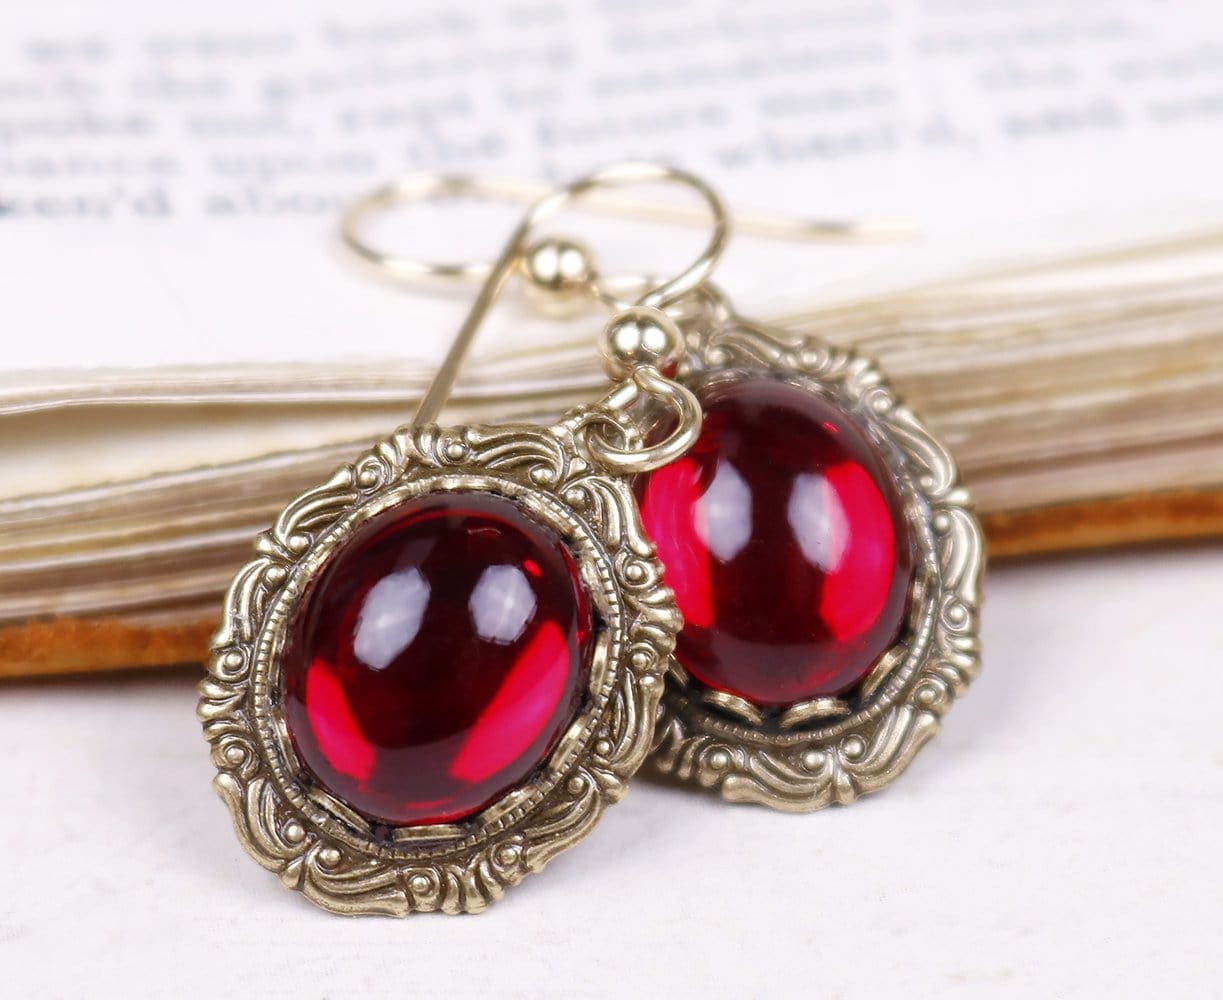 Perceval Earrings in Ruby - Antiqued Brass by dosha of Rabbitwood & Reason